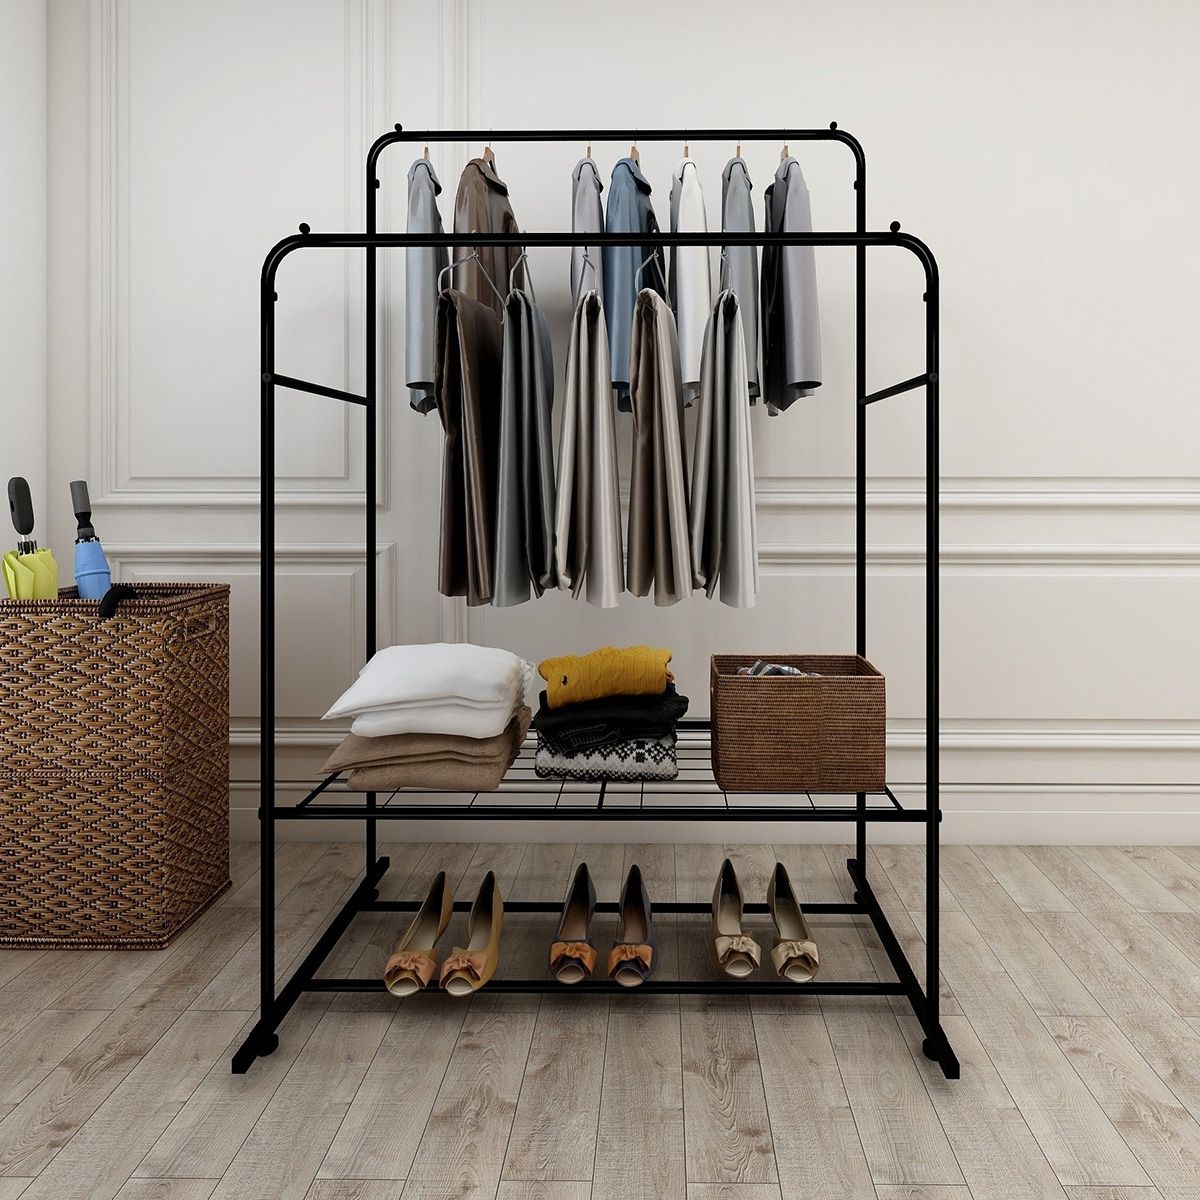 Black Metal Free Standing Closet Organizer Double Hanging Rod Clothes  Garment Racks – On Sale – Bed Bath & Beyond – 34841250 Inside Double Hanging Rail For Wardrobes (View 18 of 20)